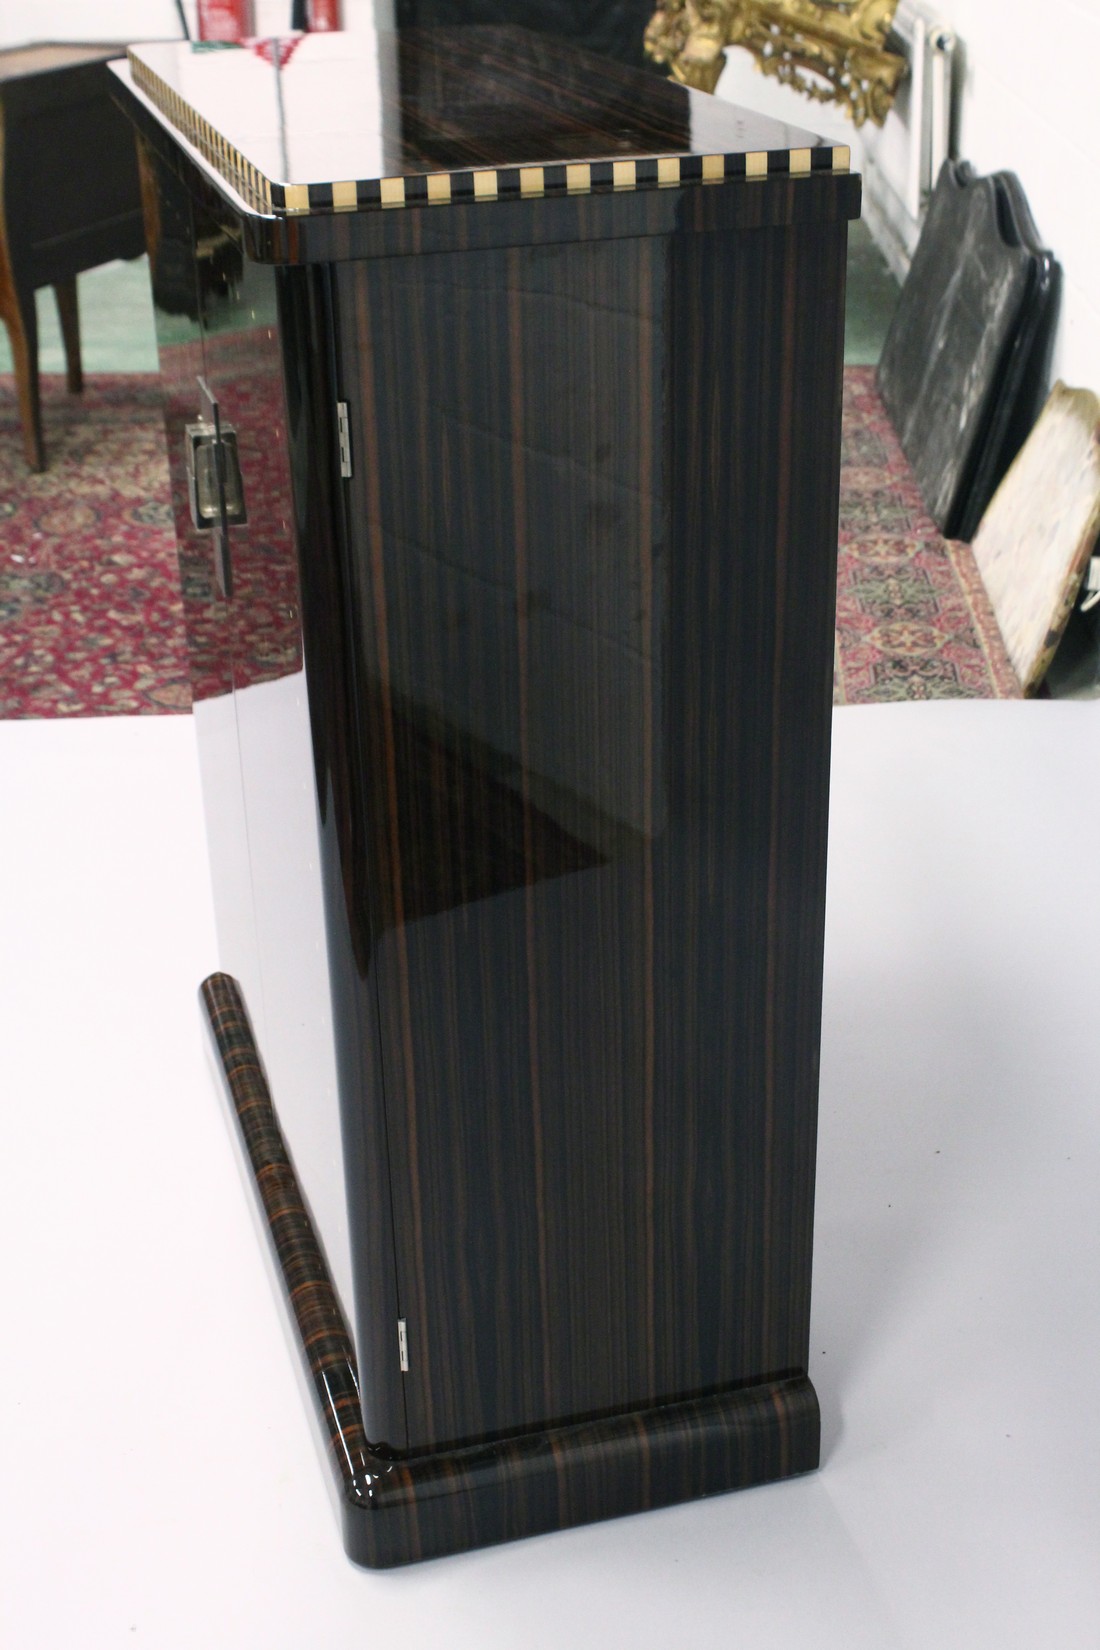 DAVID PATRICK GAGUECH (French Furniture Designer) A TWO-DOOR CABINET WITH A MACASSOR EBONY VENEER - Image 8 of 8